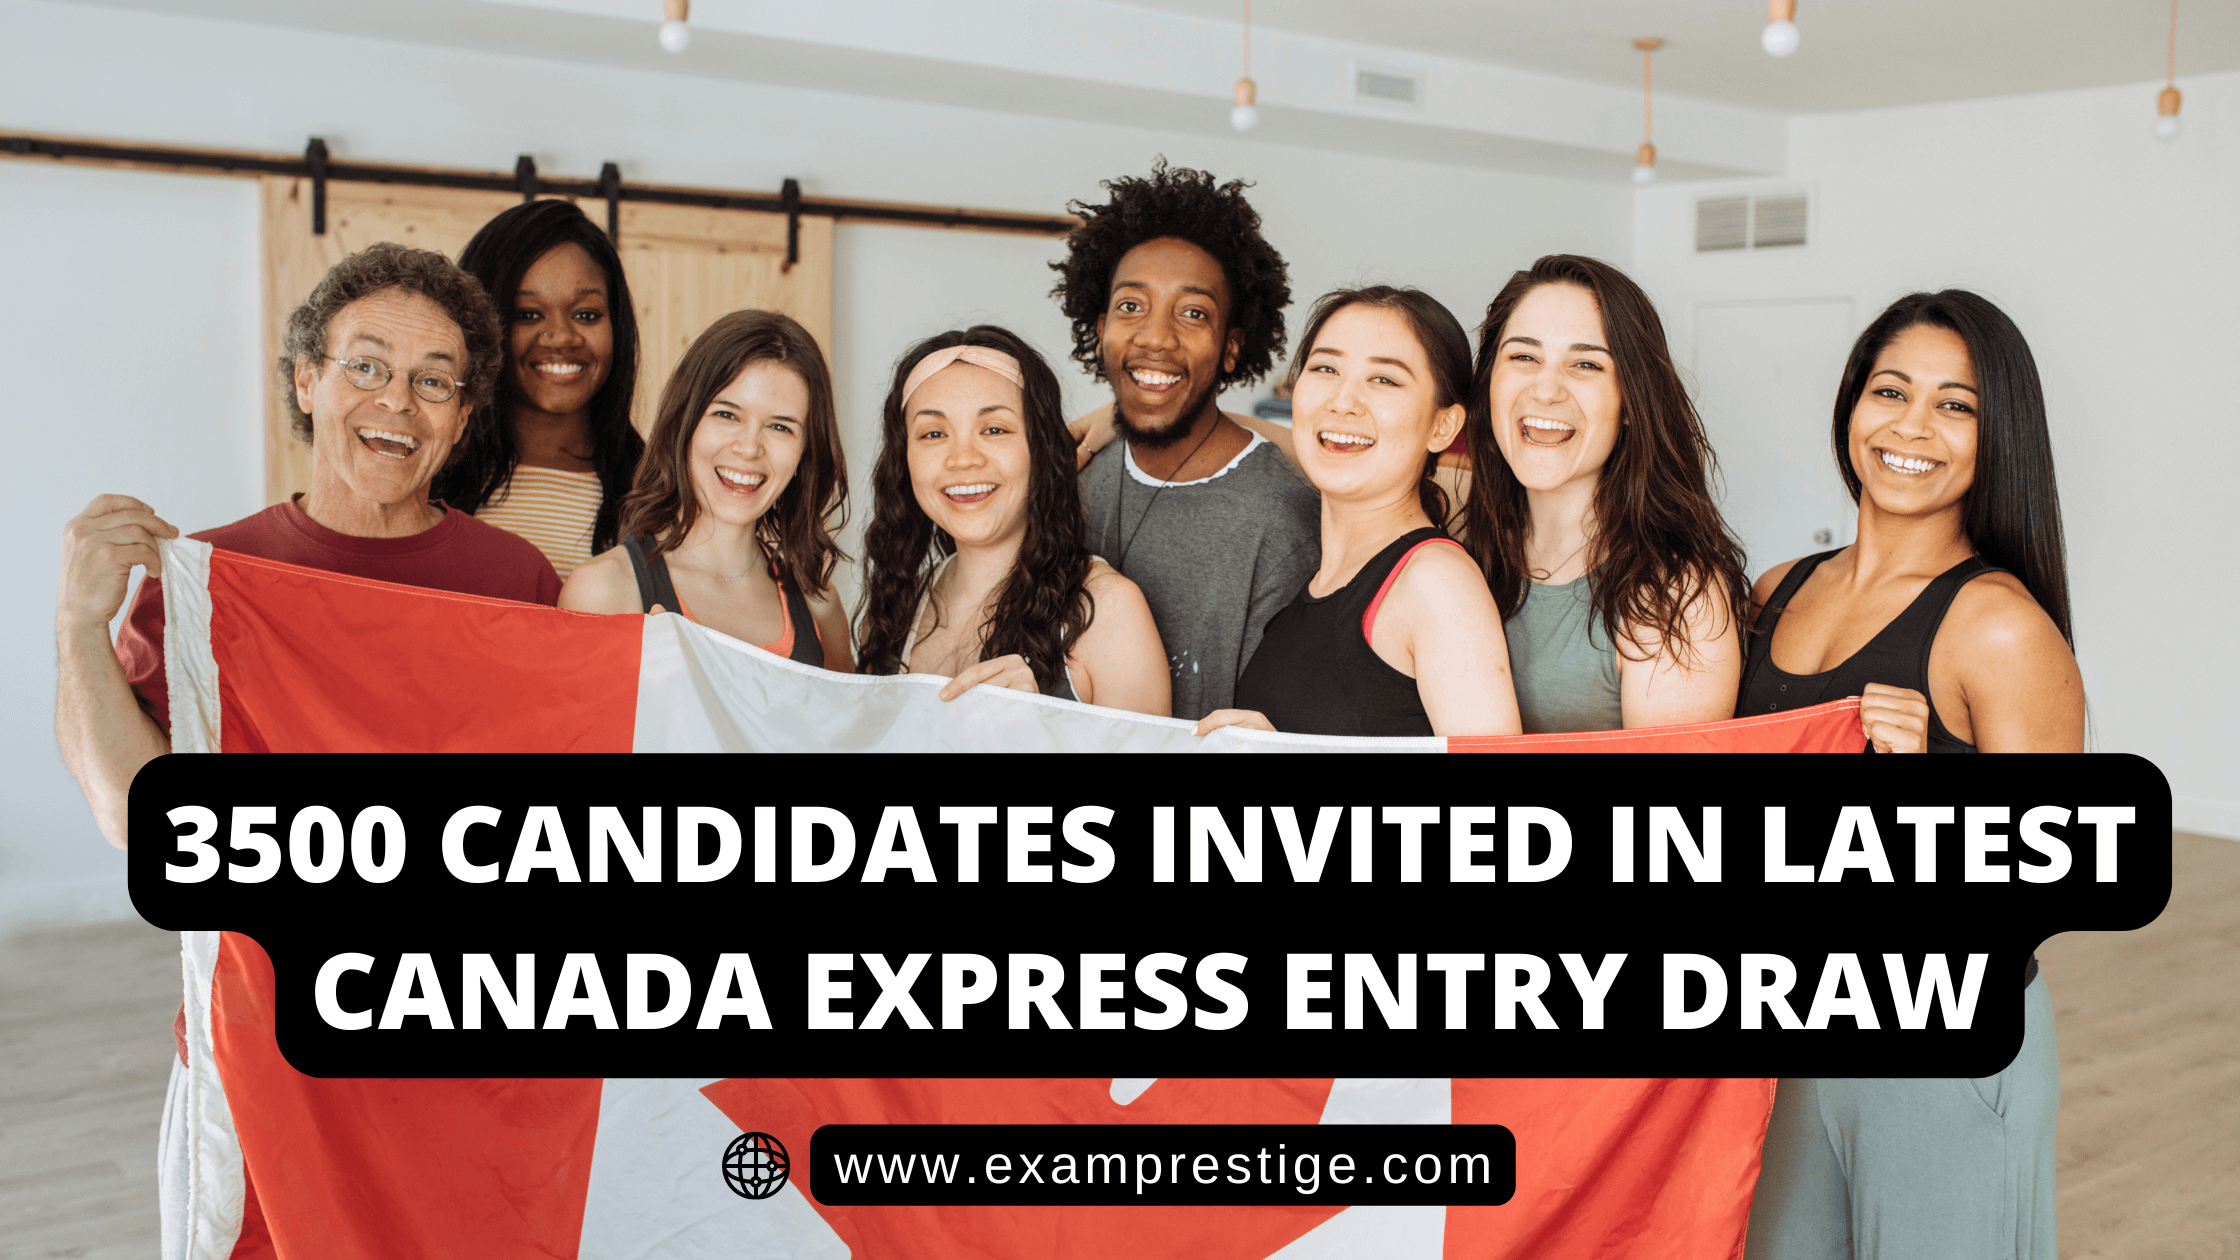 Canada Express Entry: 3500 Candidates Invited in Latest April Draw